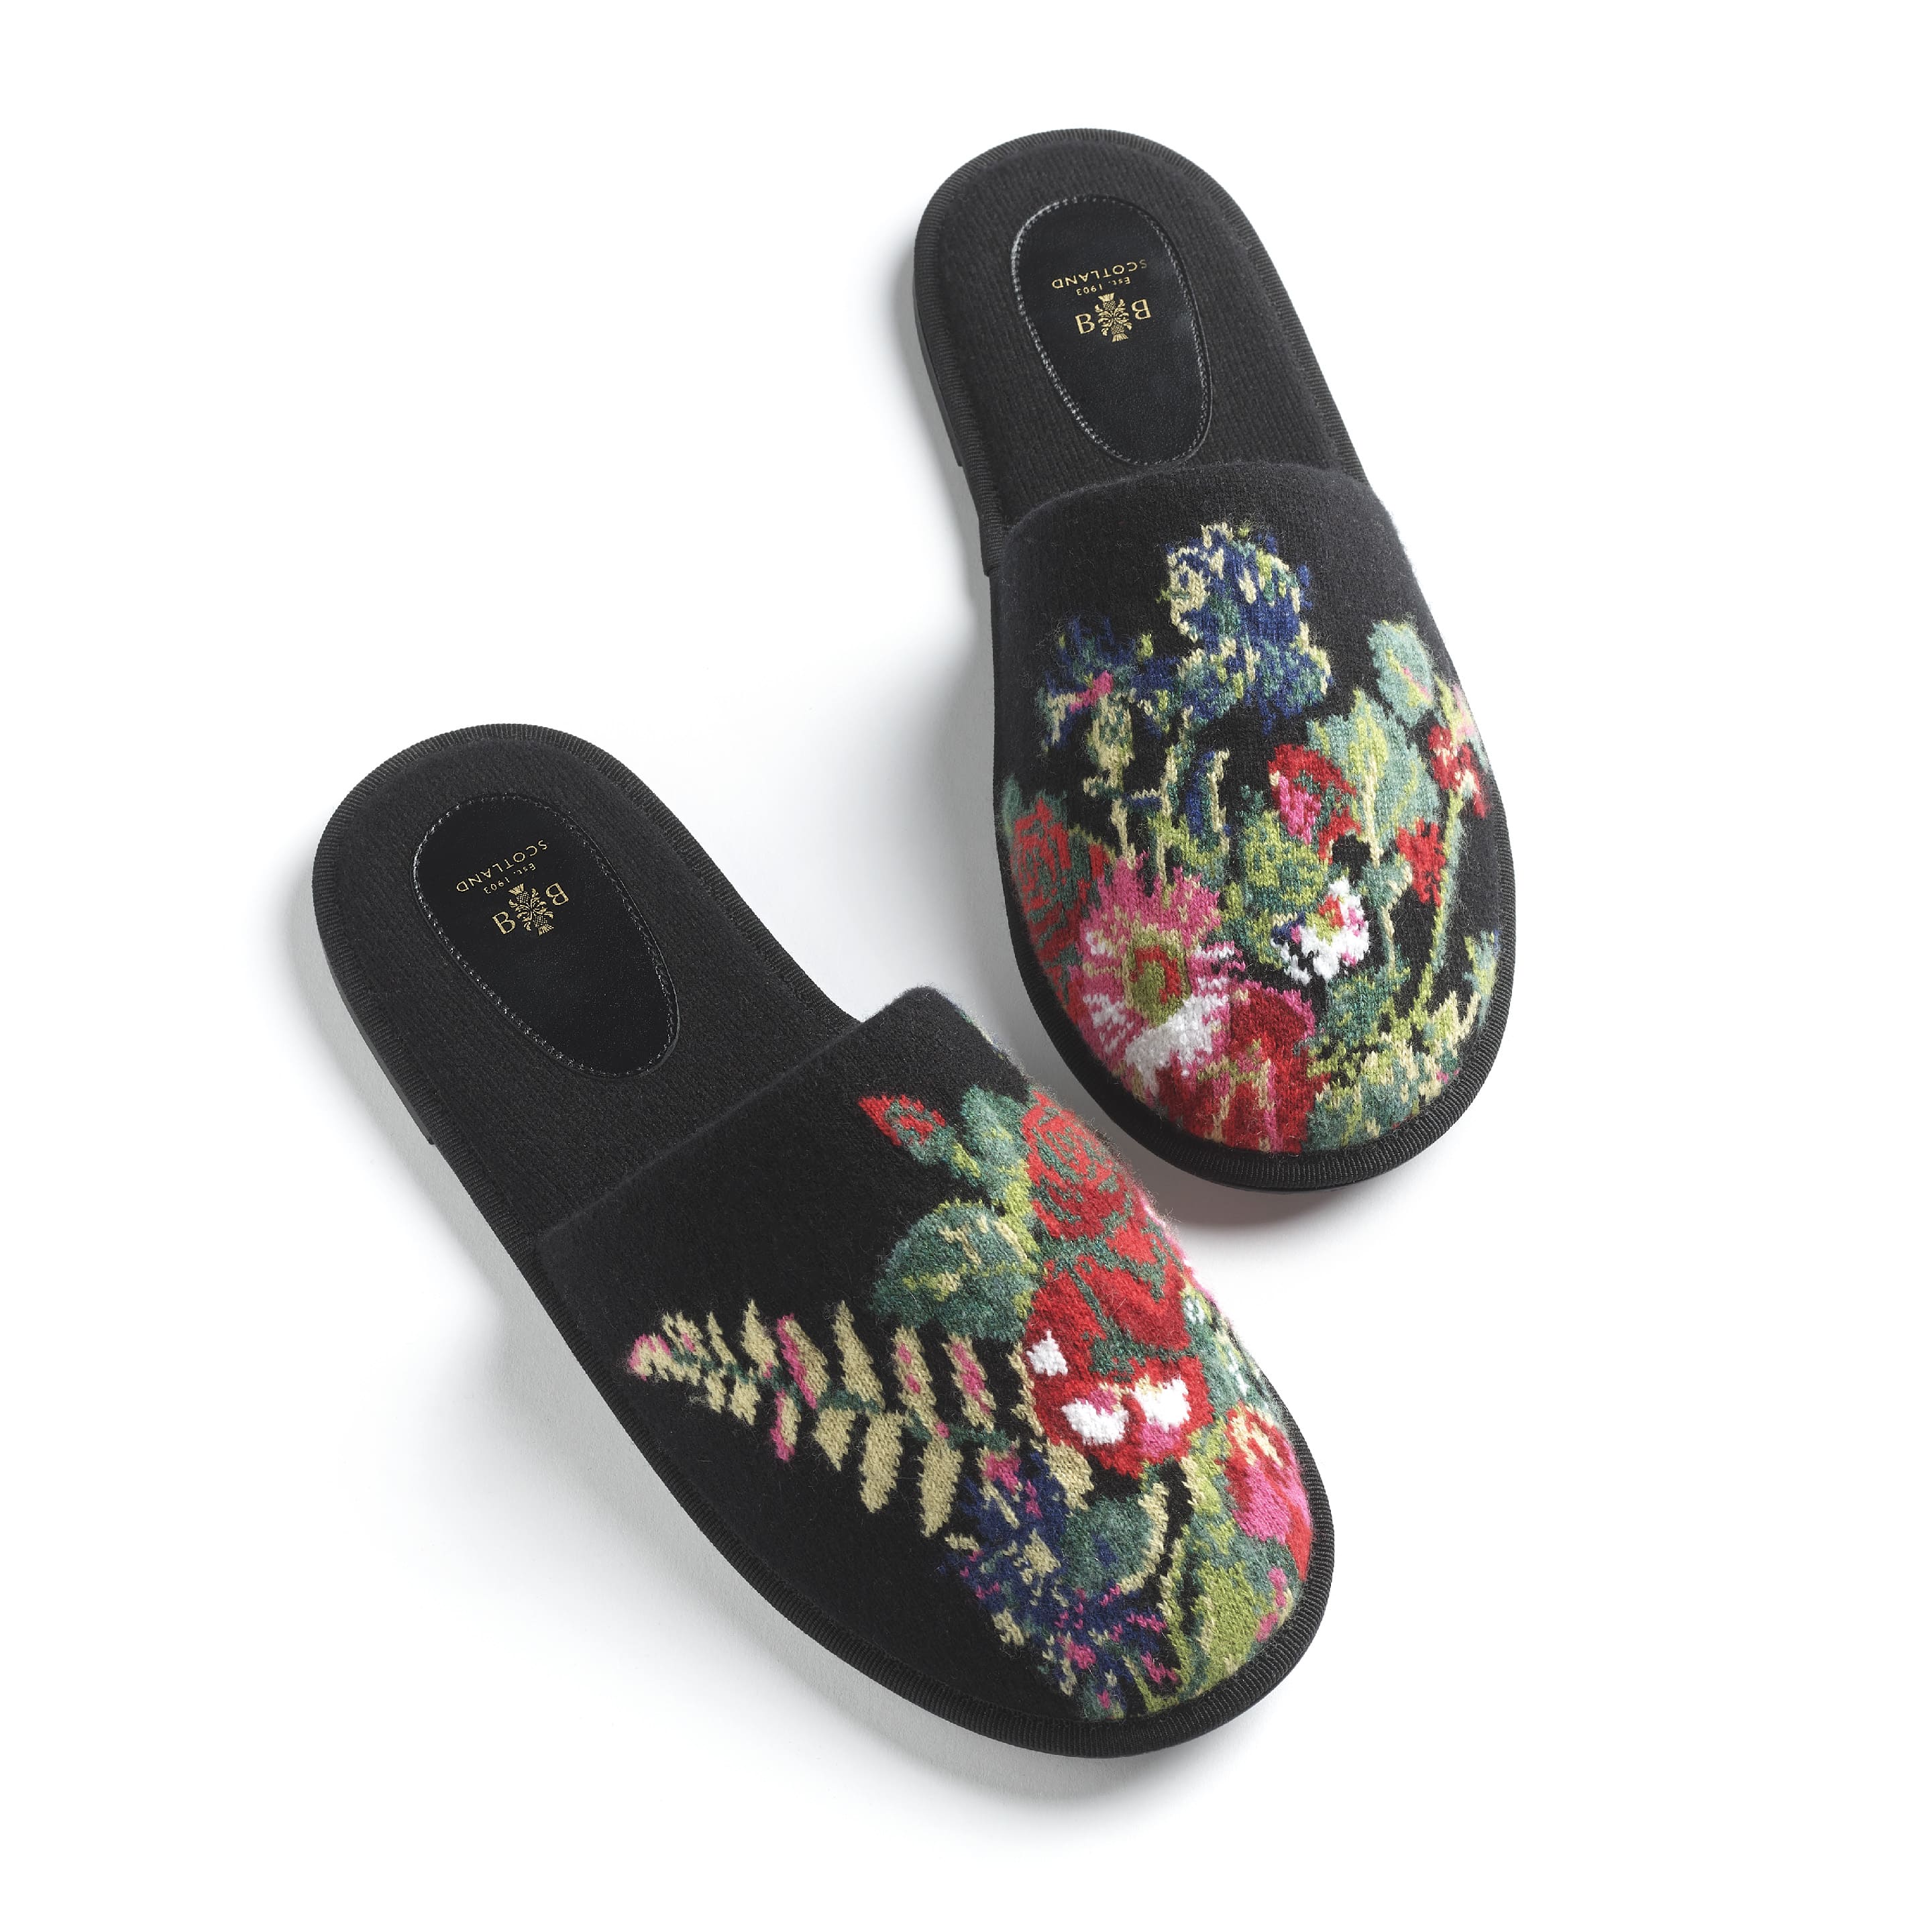 Floral cashmere slippers – Barrie.com